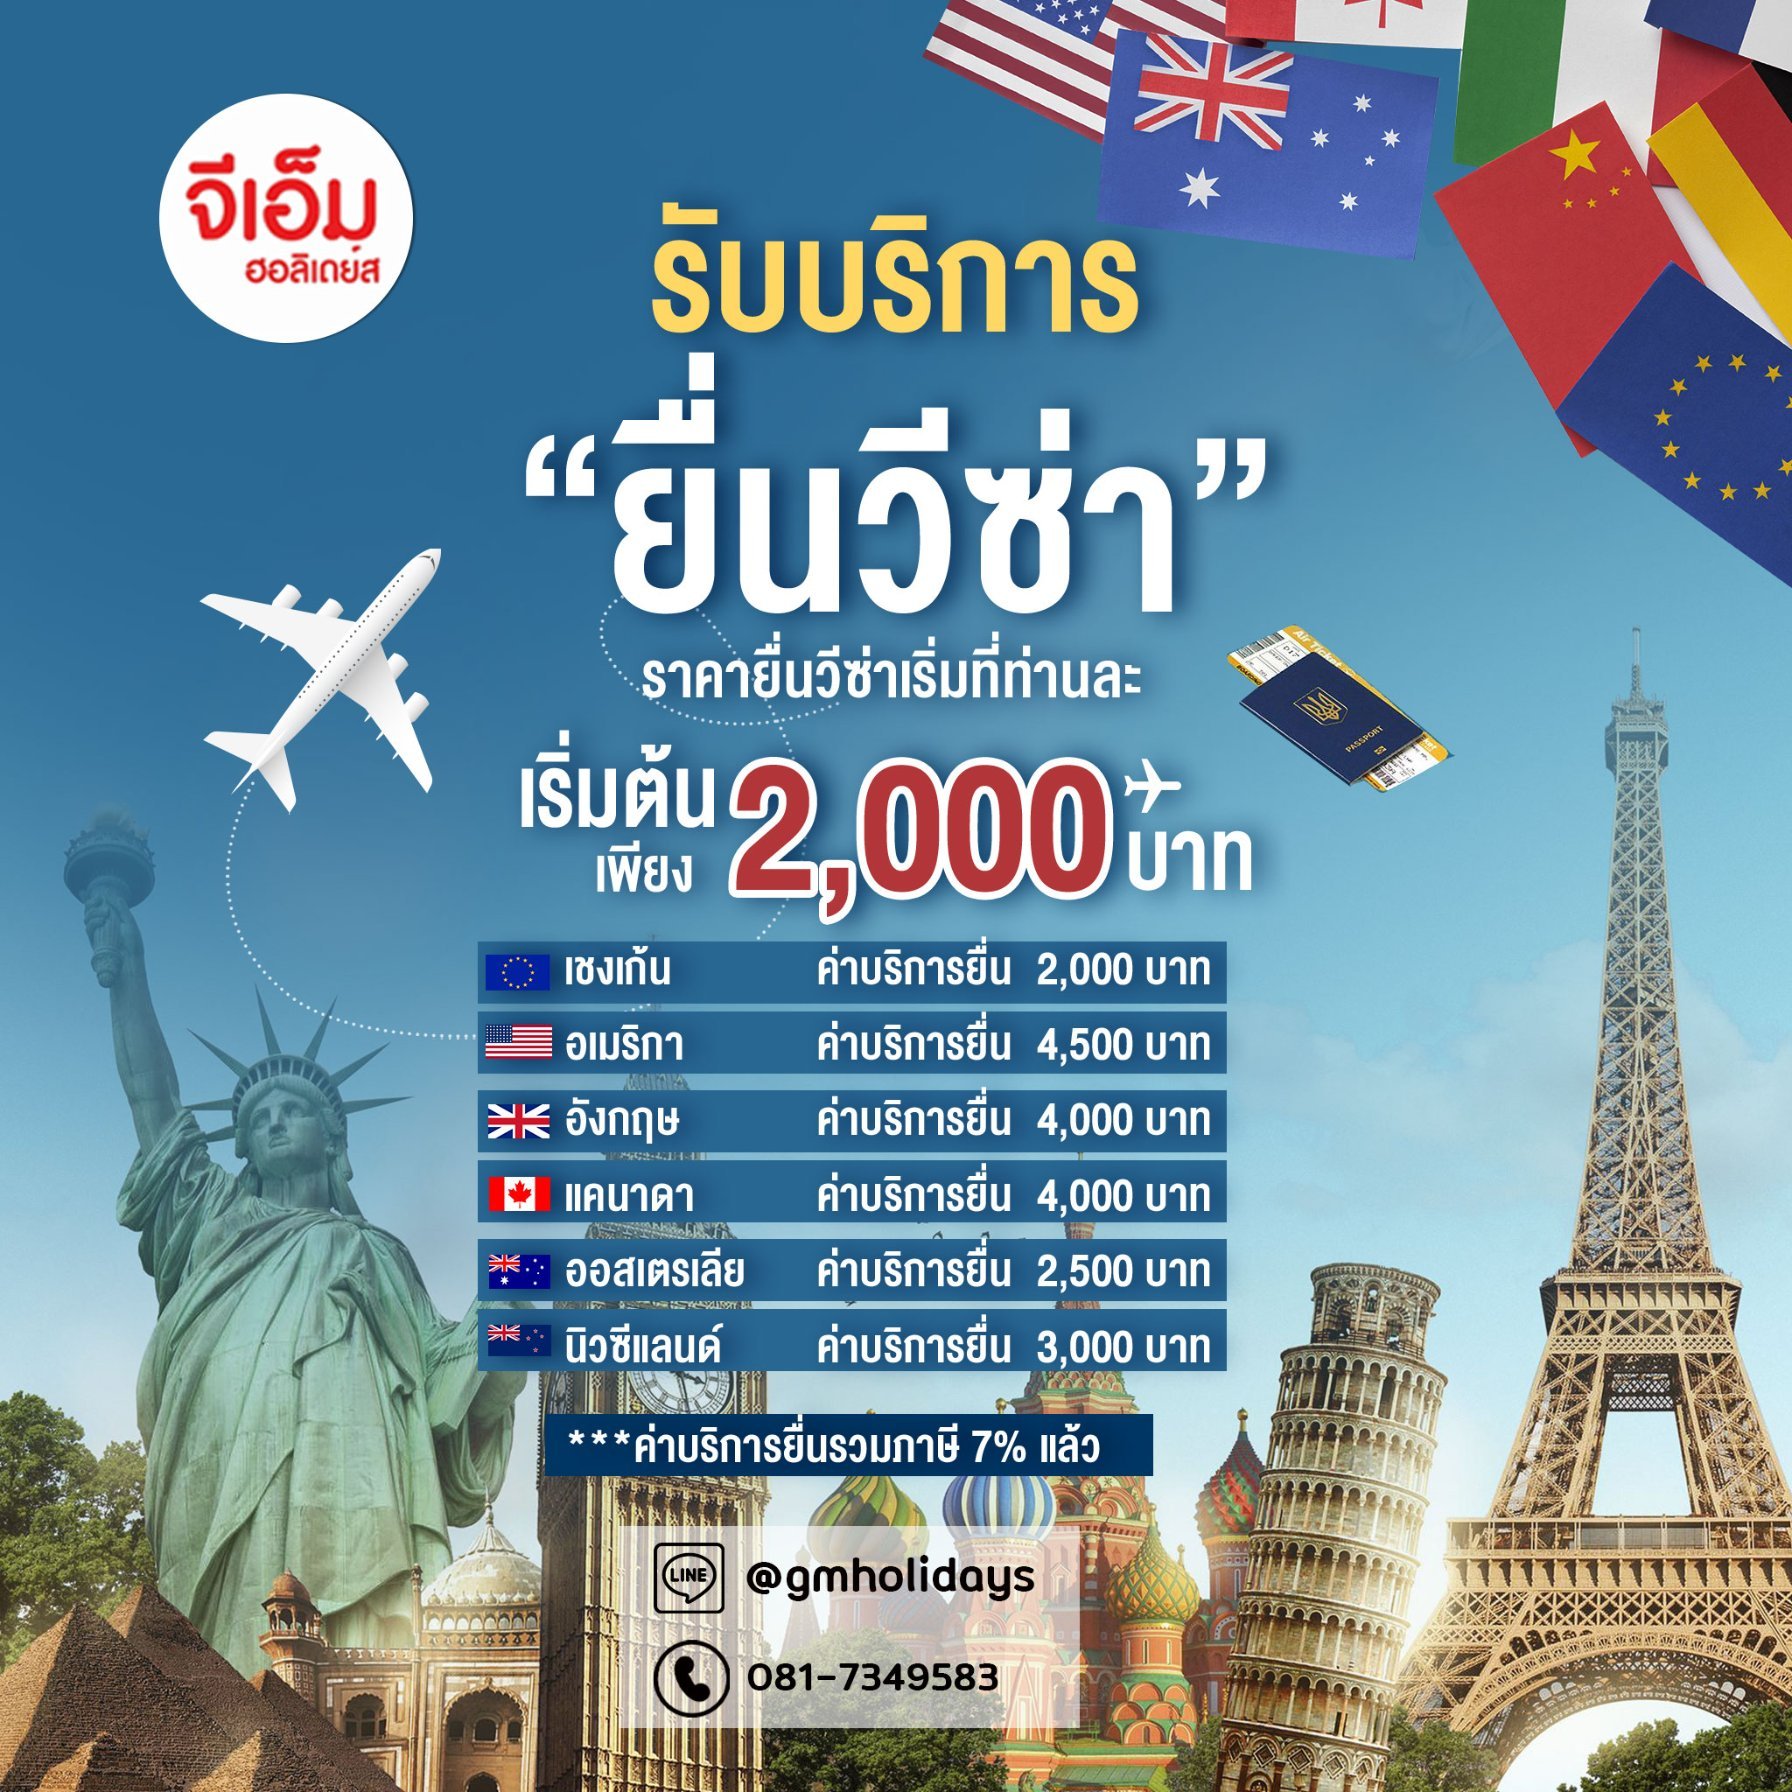 Long Stay Visa & Retirement in Thailand